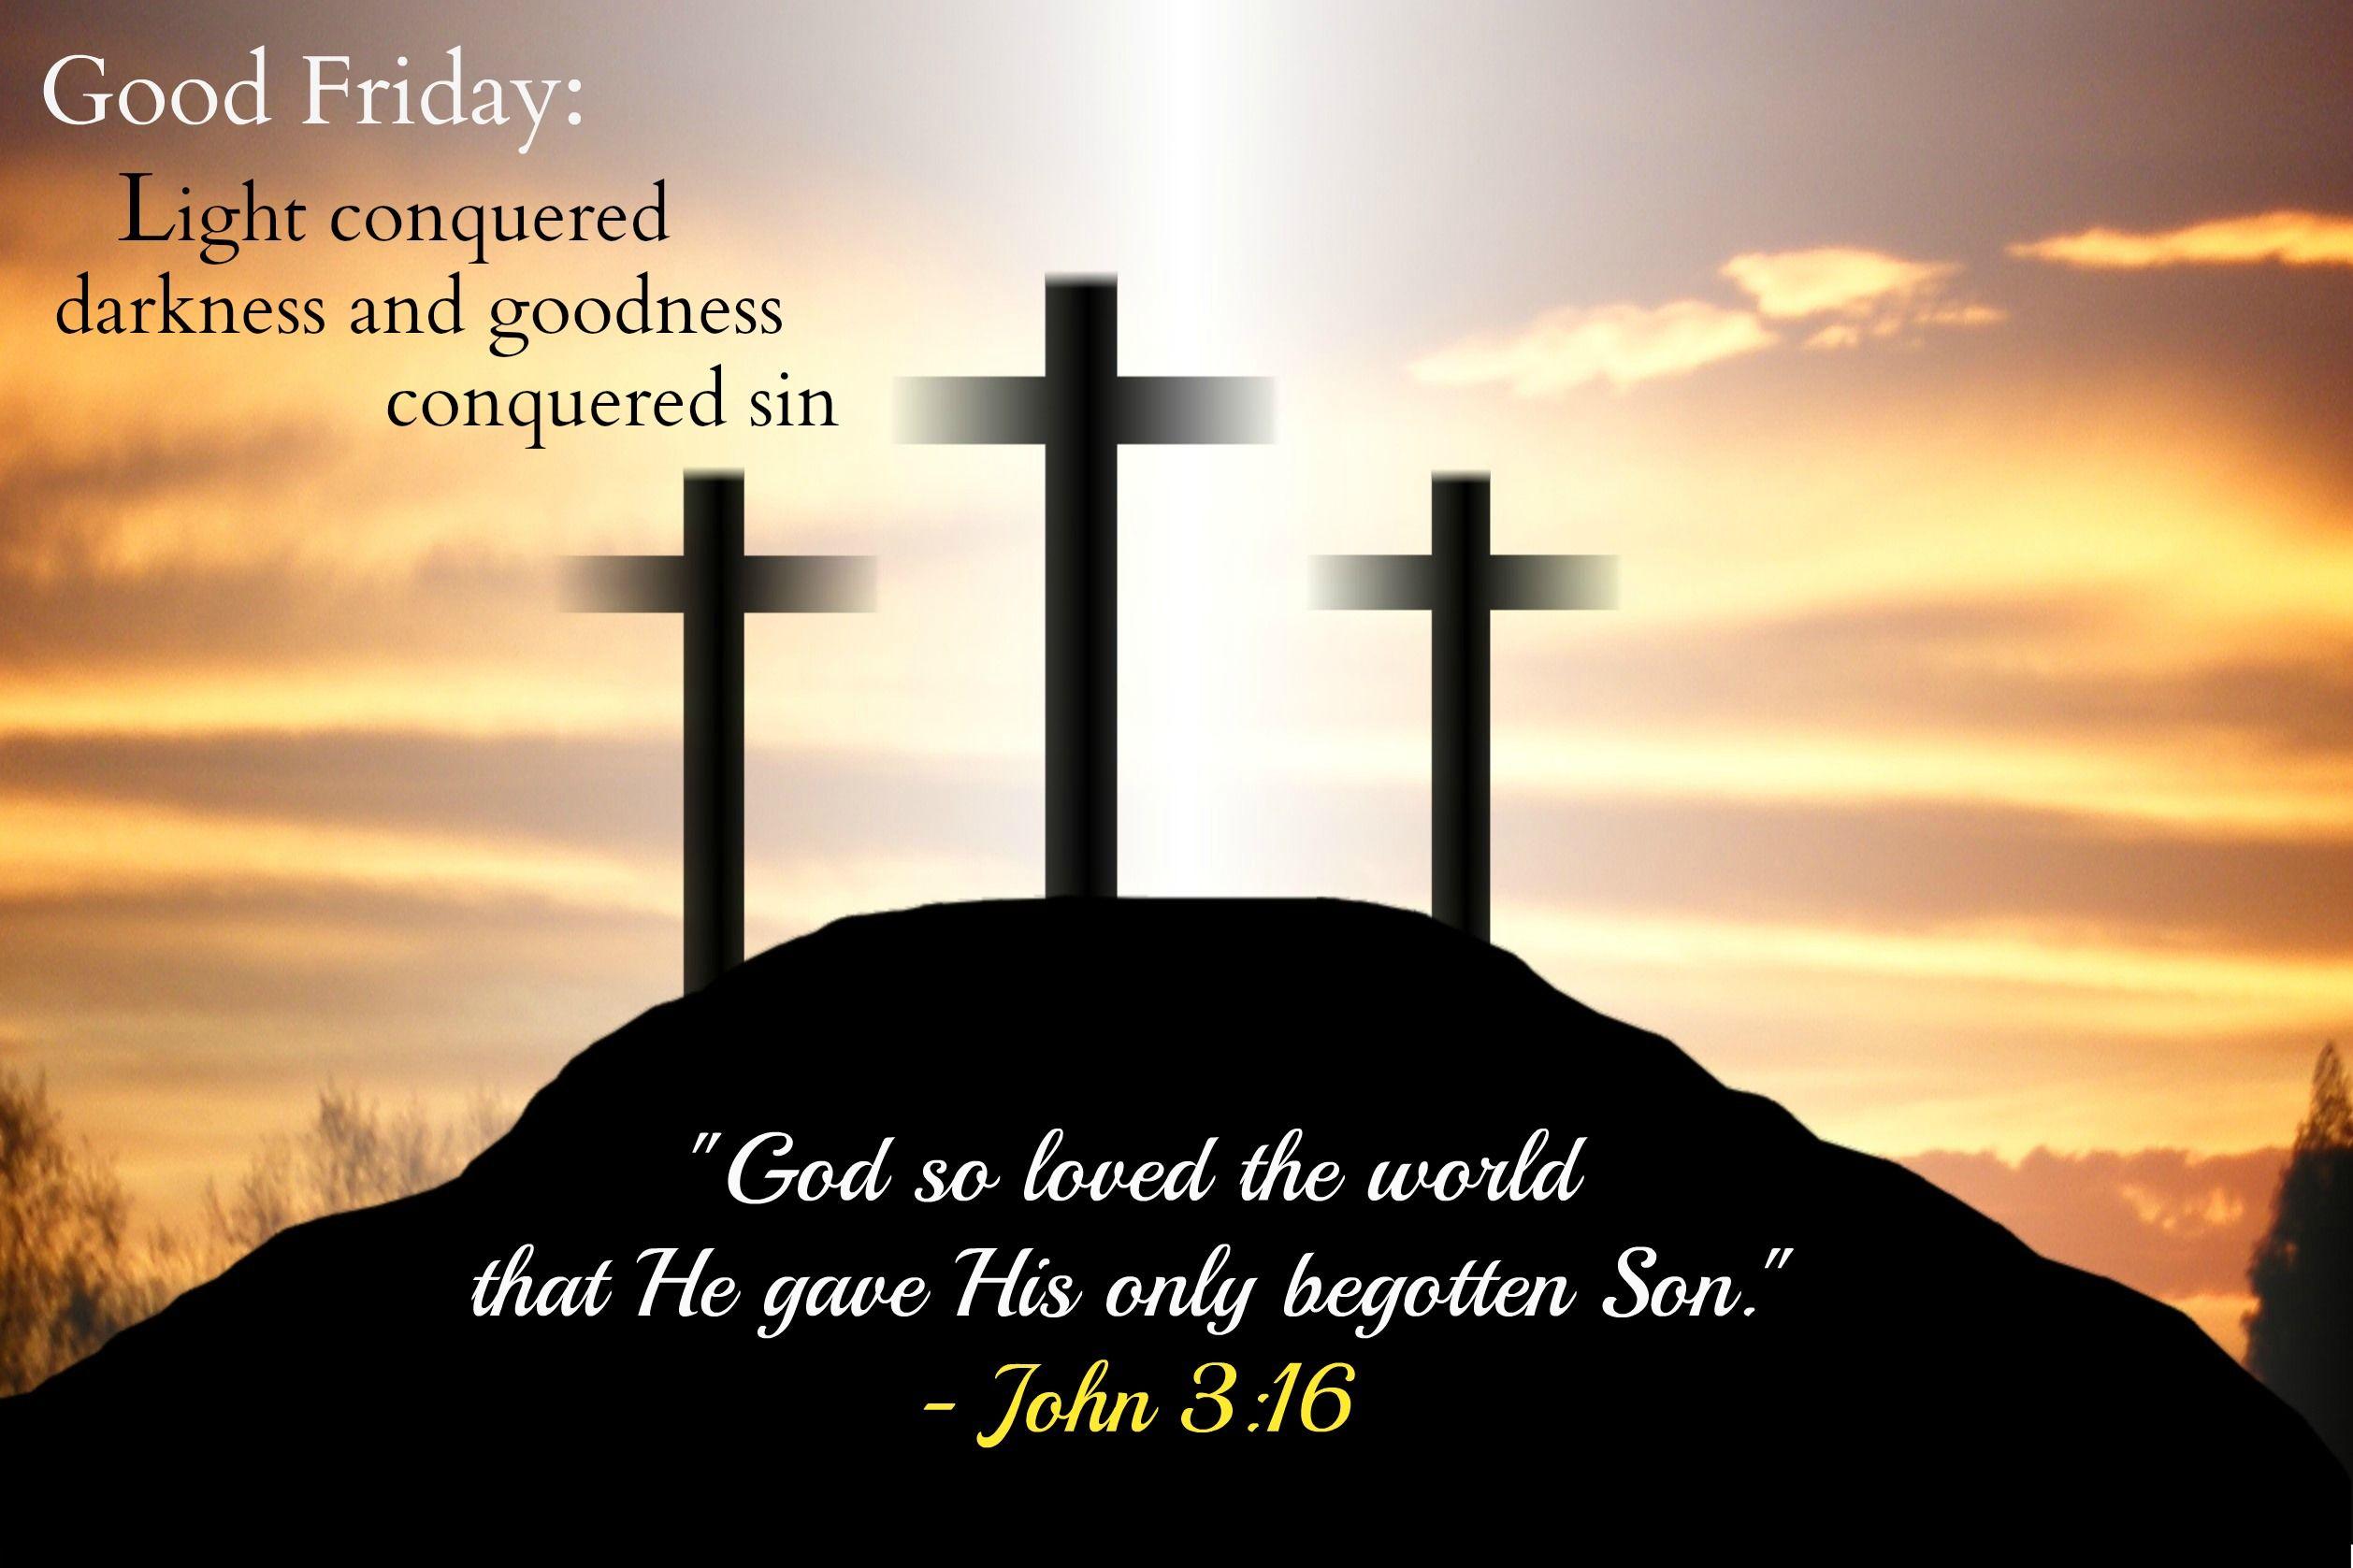 Good Friday Quotes, Wishes, Image, Sayings, Greetings 2017